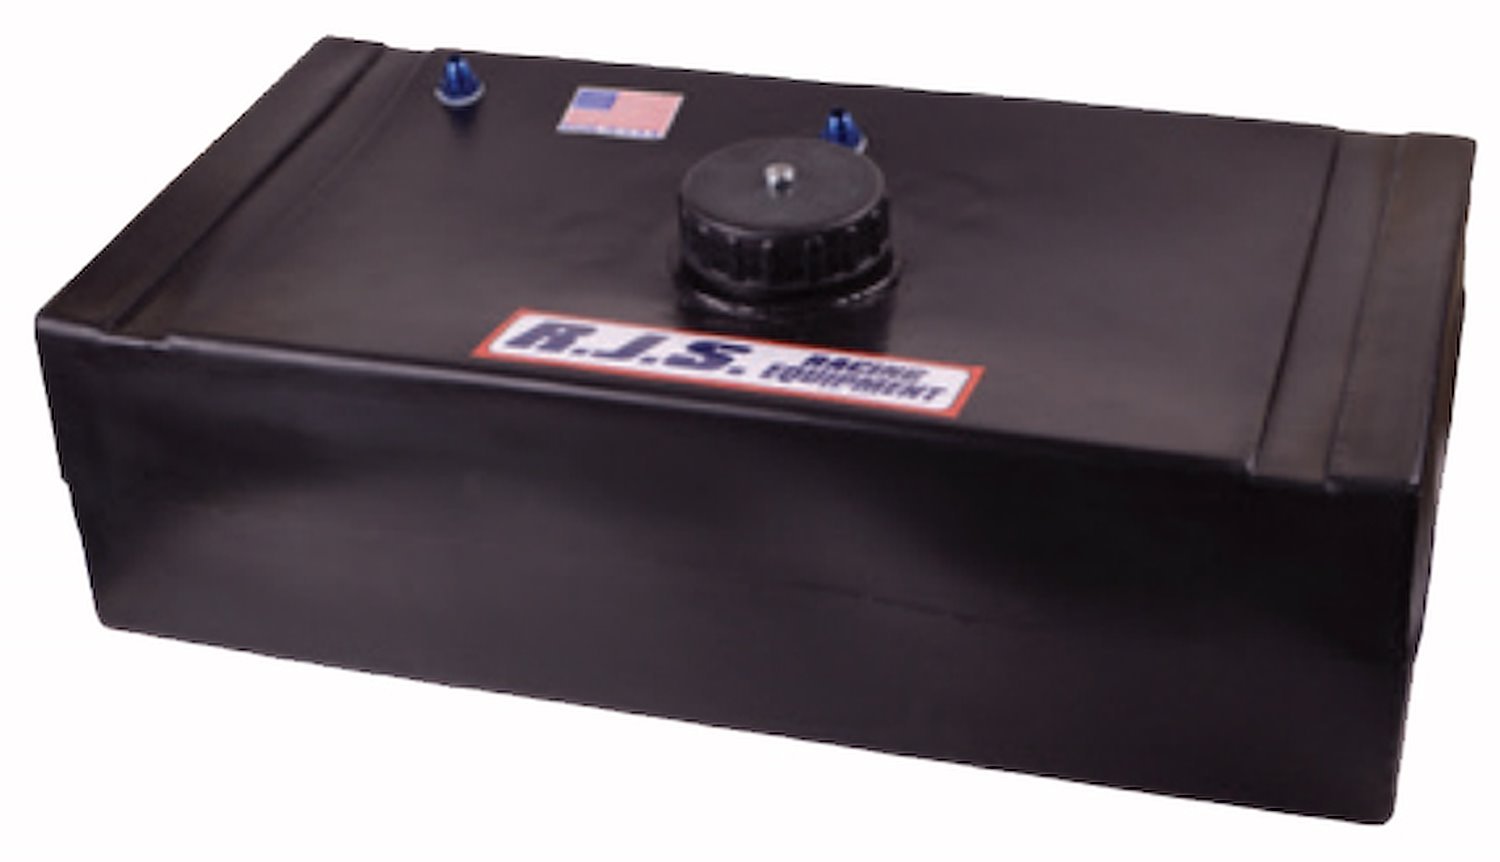 22 Gallon Economy Fuel Cell with Aircraft Style Filler Cap